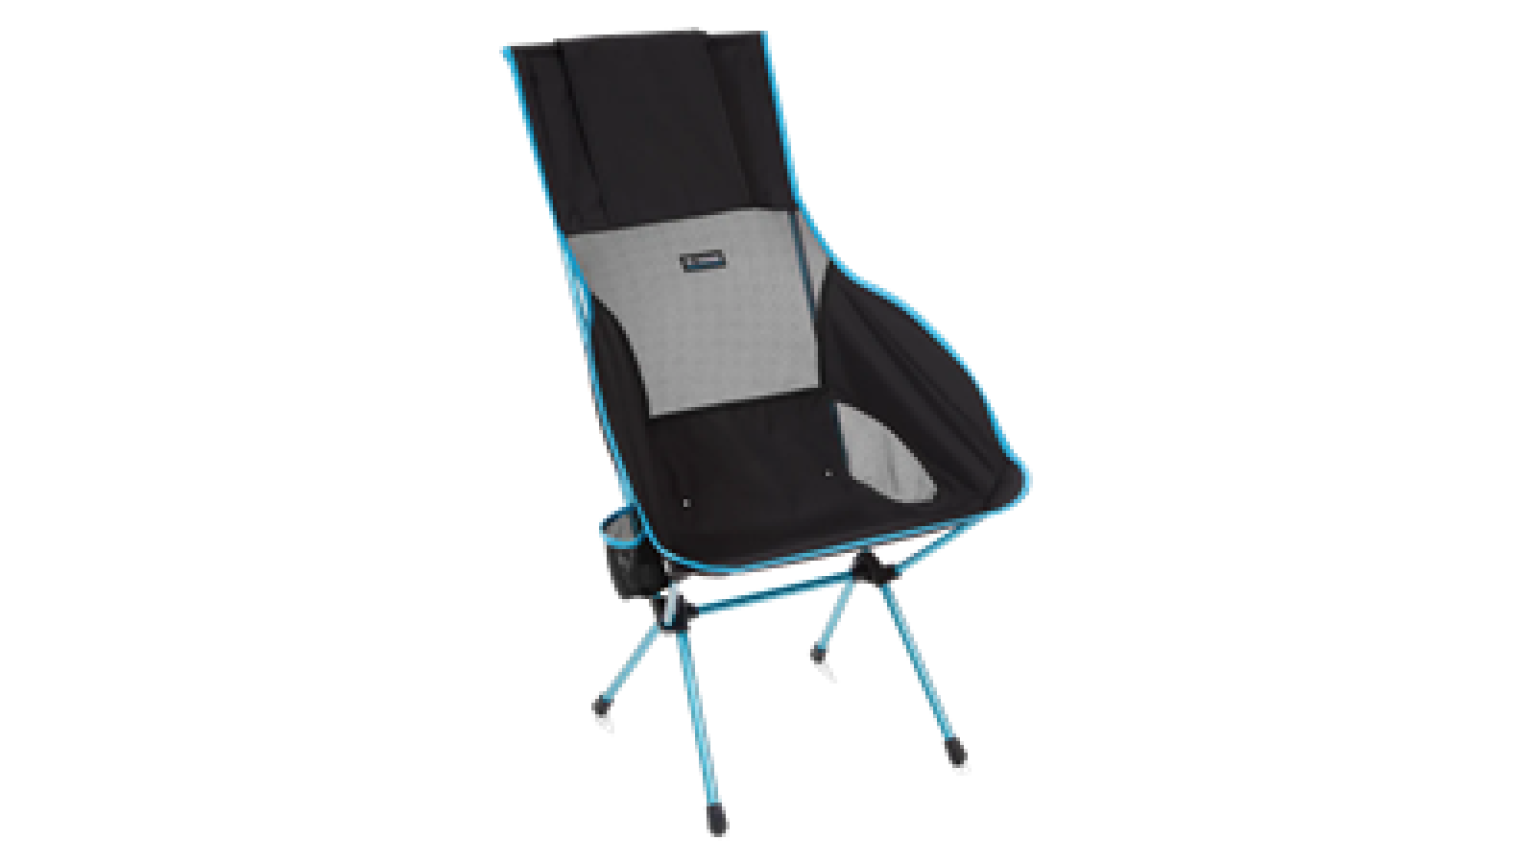 a3e509a4/camping chair png